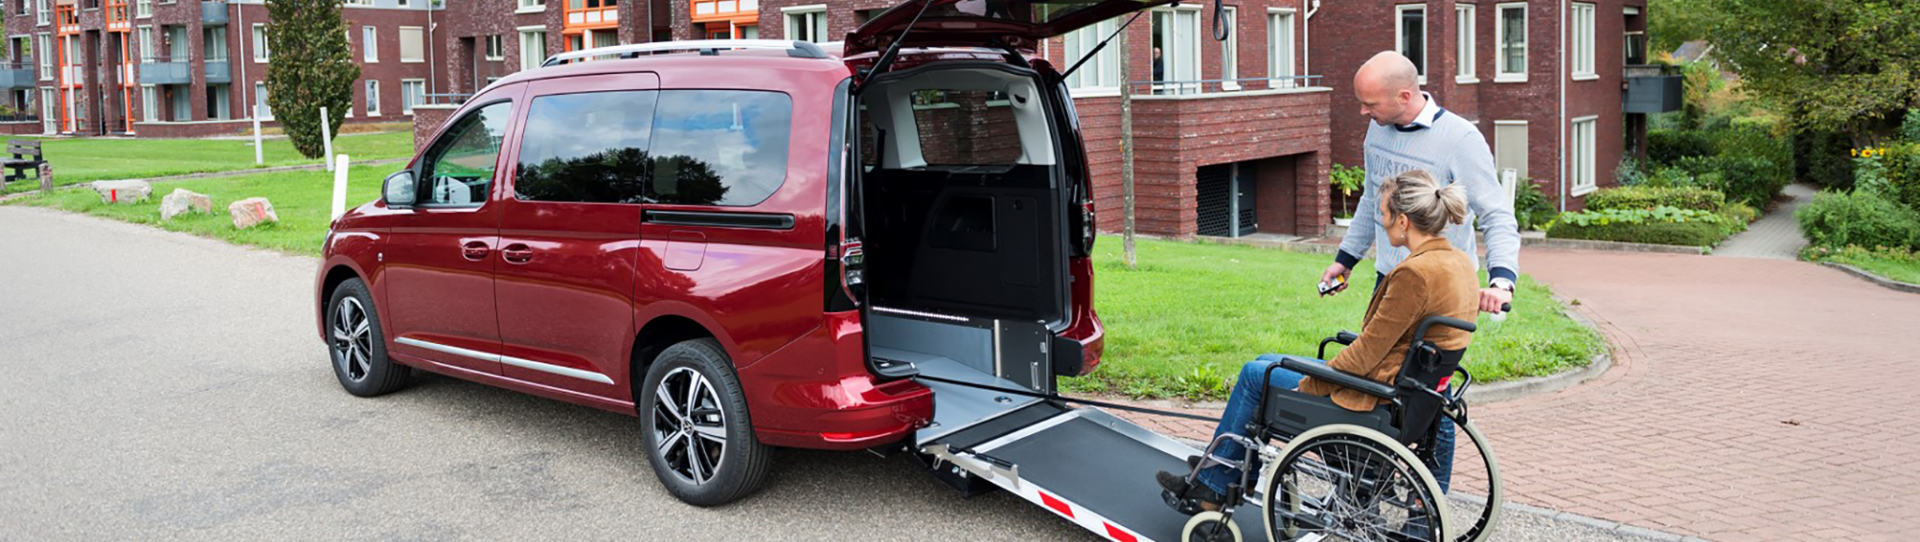 Foto: Volkswagen Caddy unseres Partners B-Style 